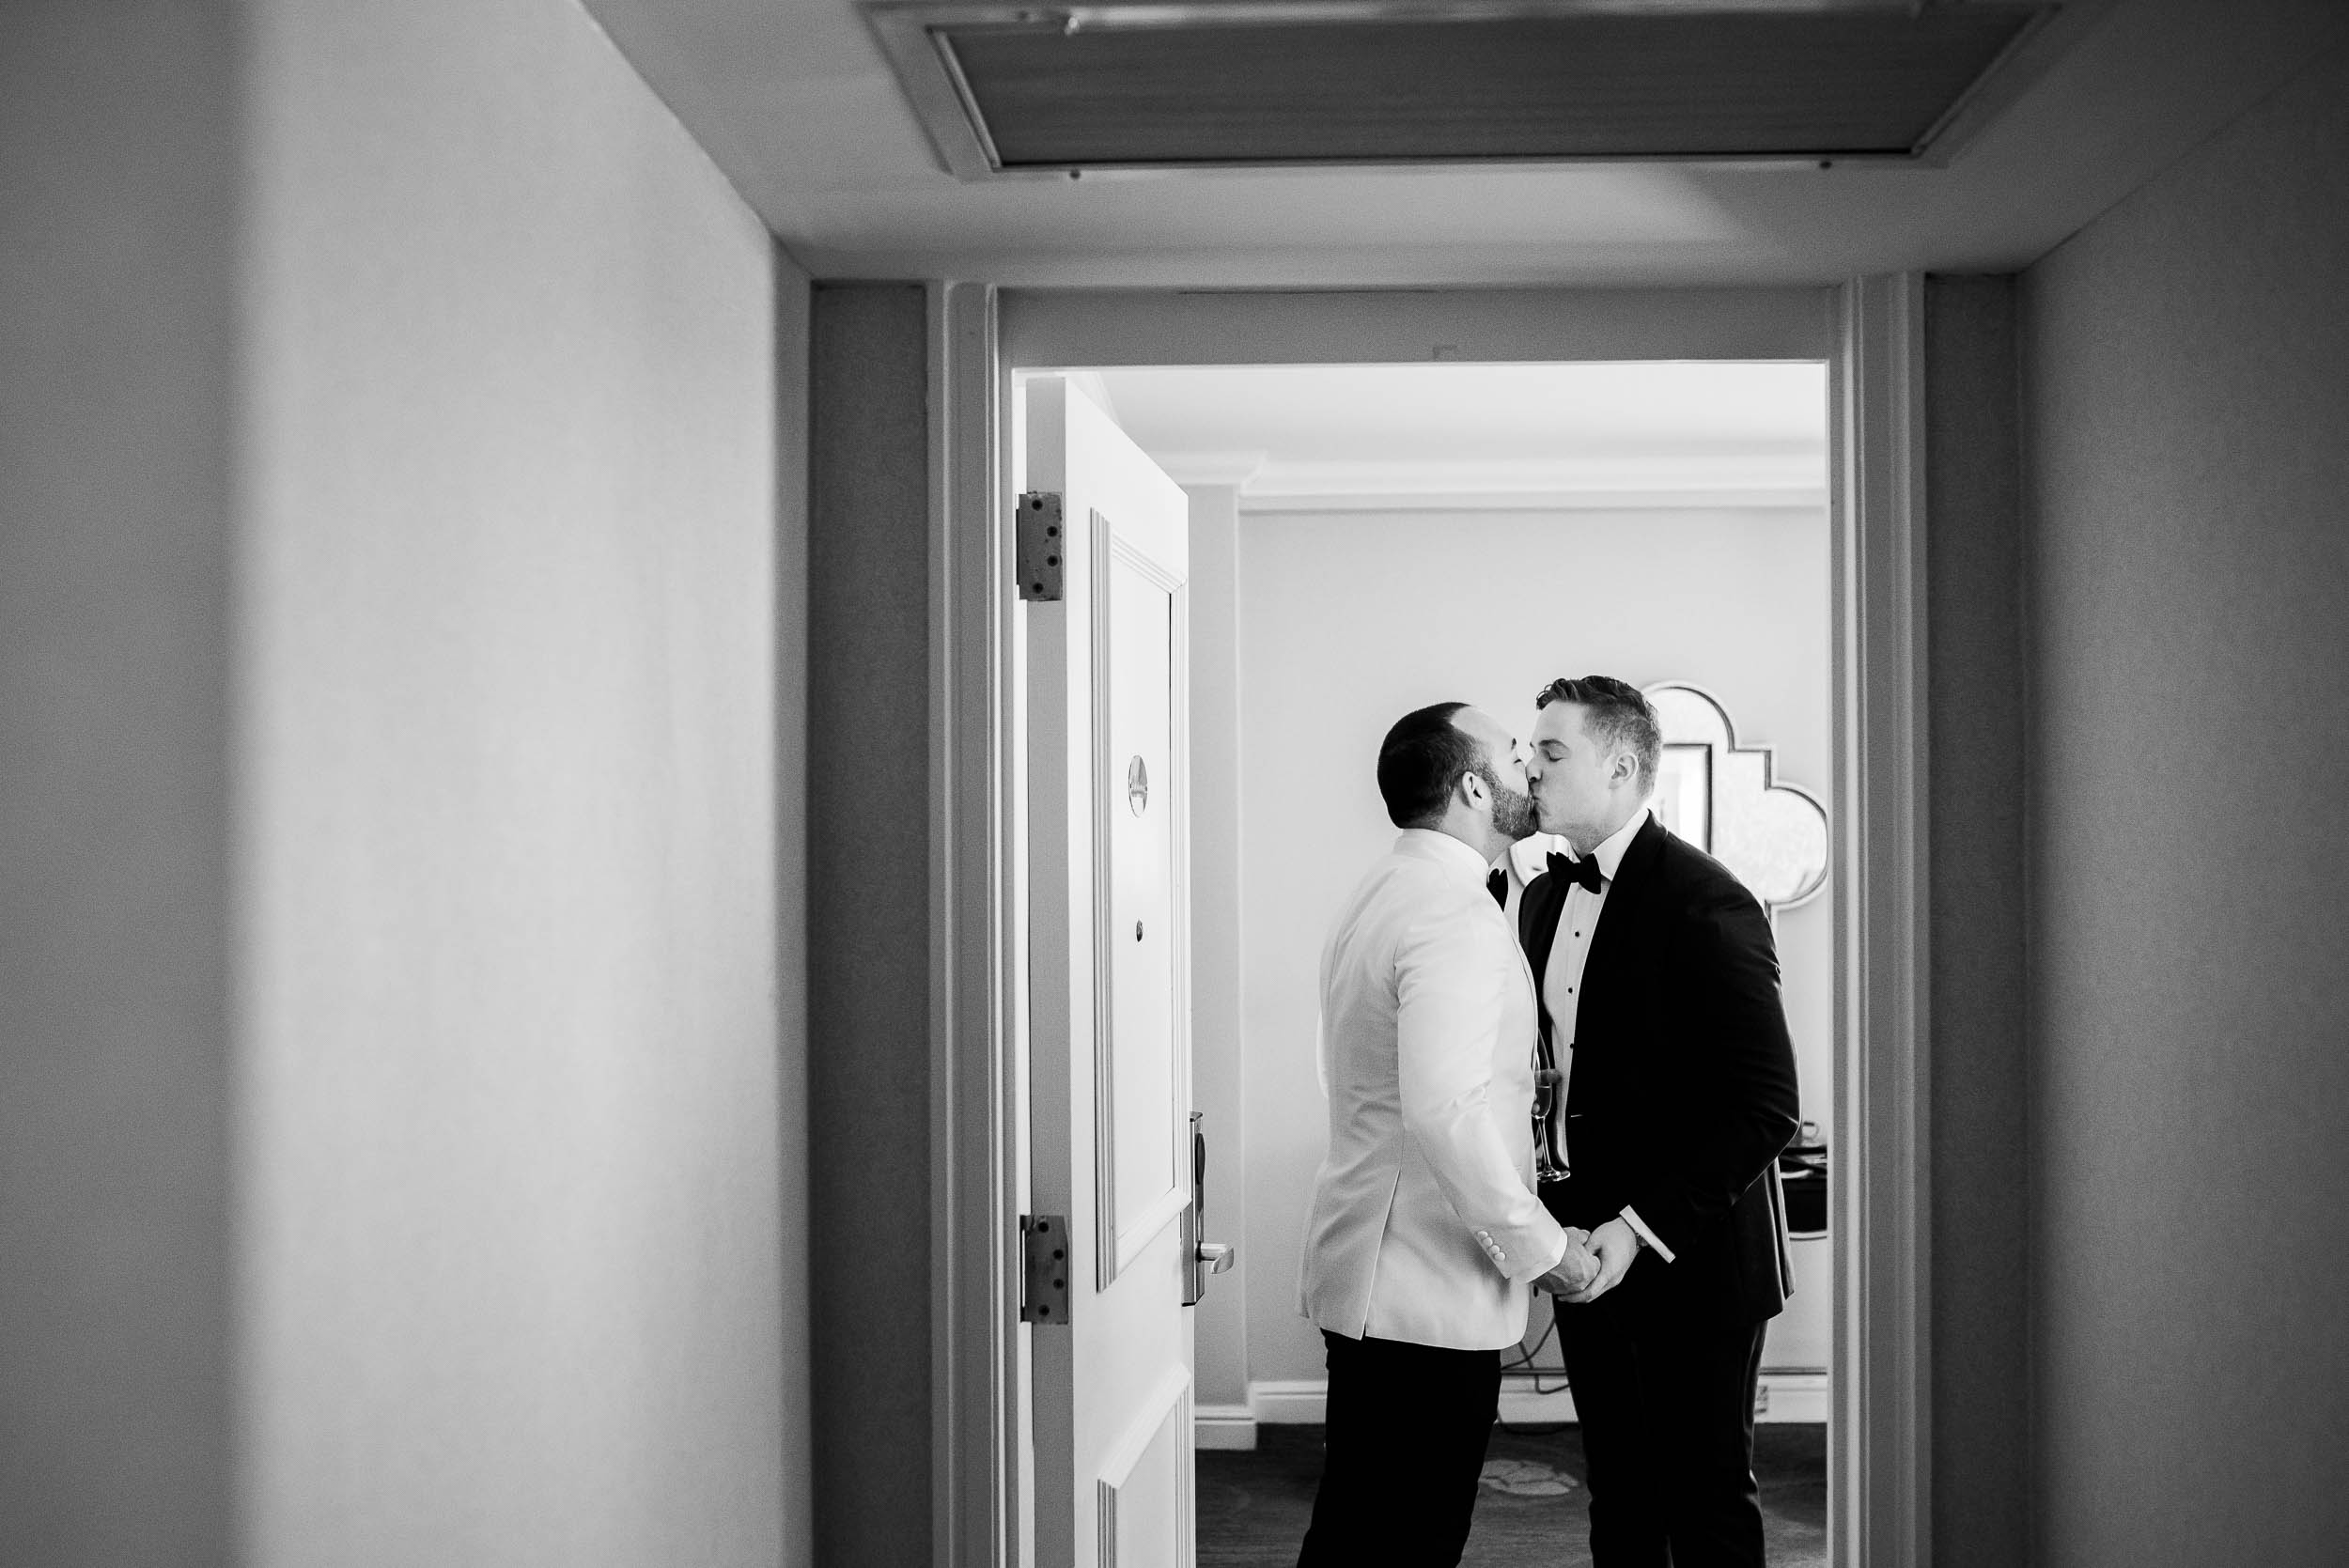 Grooms share a moment before luxurious fall wedding at the Chicago Symphony Center captured by J. Brown Photography. See more wedding ideas at jbrownphotography.com!